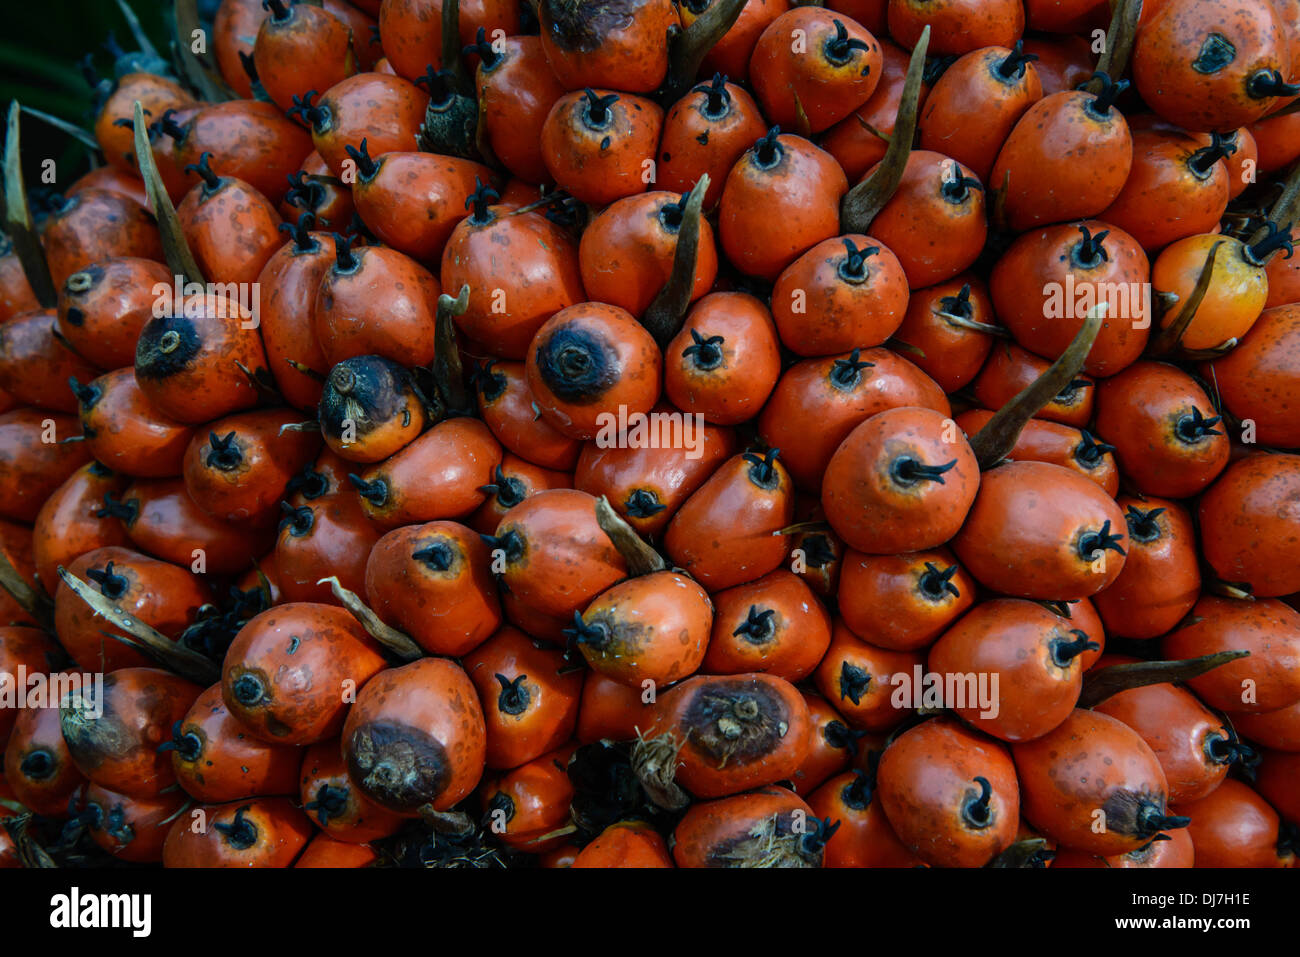 Ripe palm fruit ready to extract oil and other. Background. Stock Photo